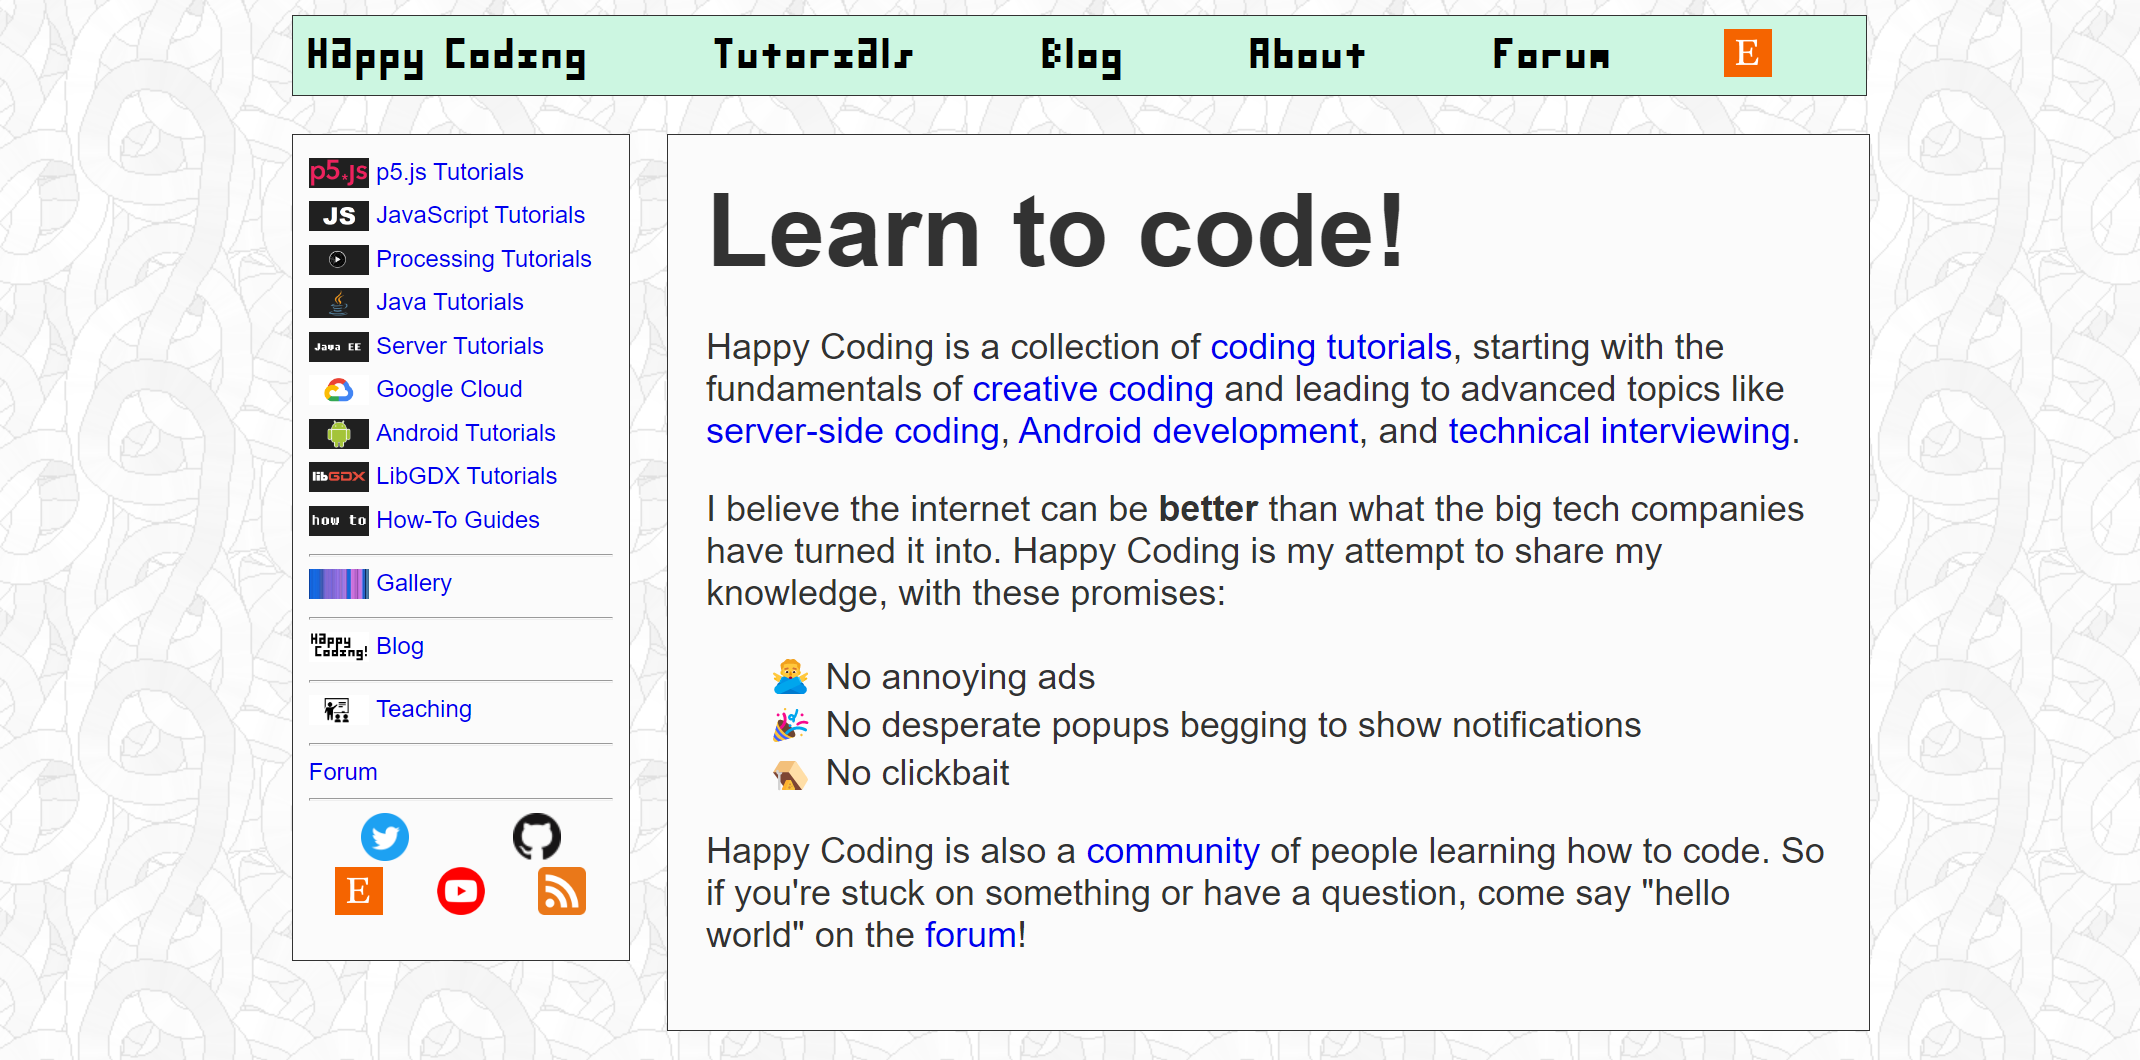 Redesigning Happy Coding Part 2